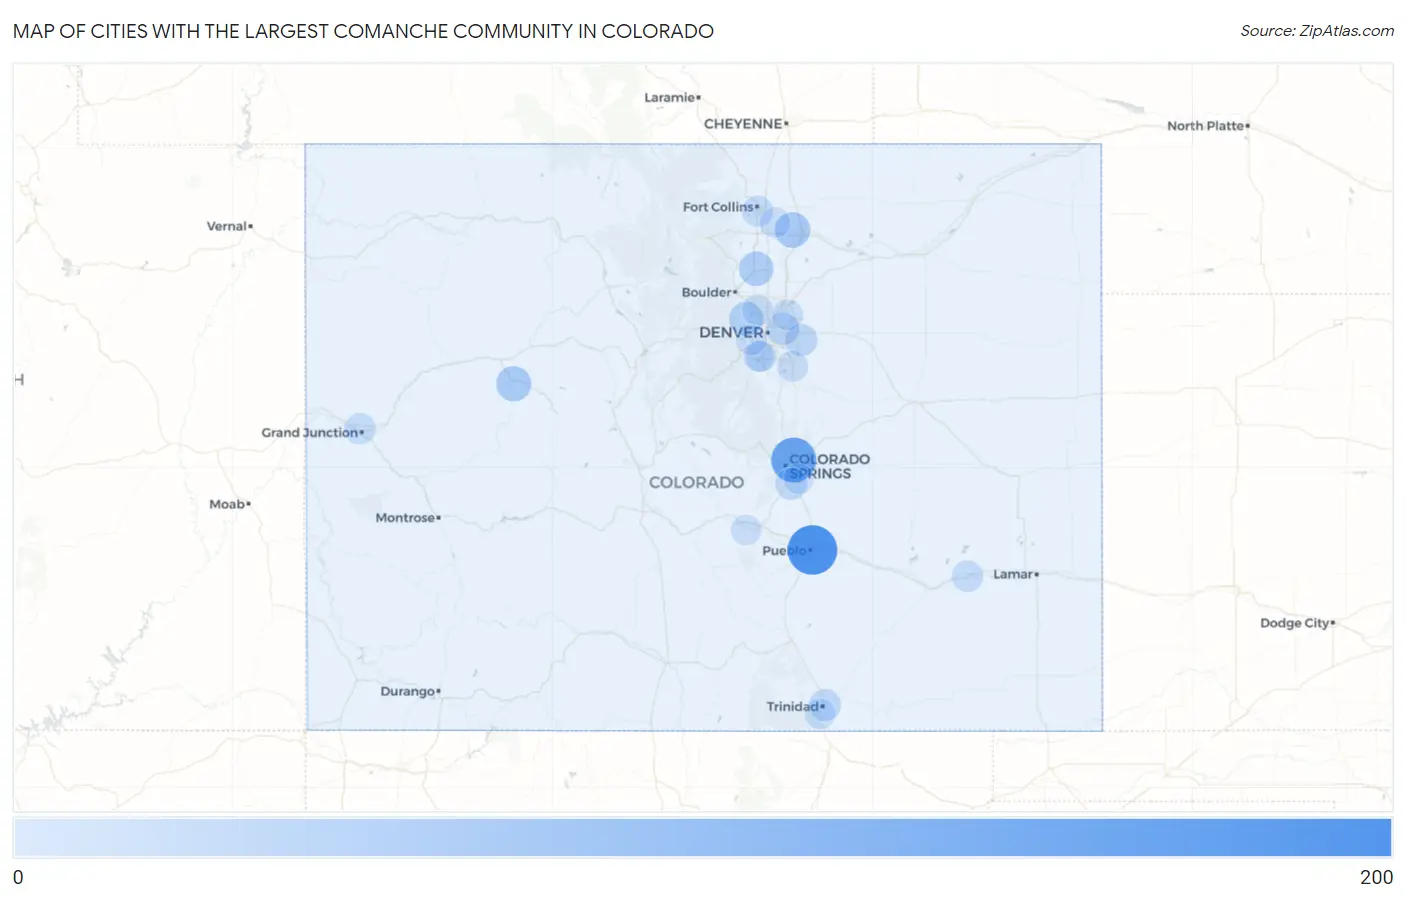 Cities with the Largest Comanche Community in Colorado Map